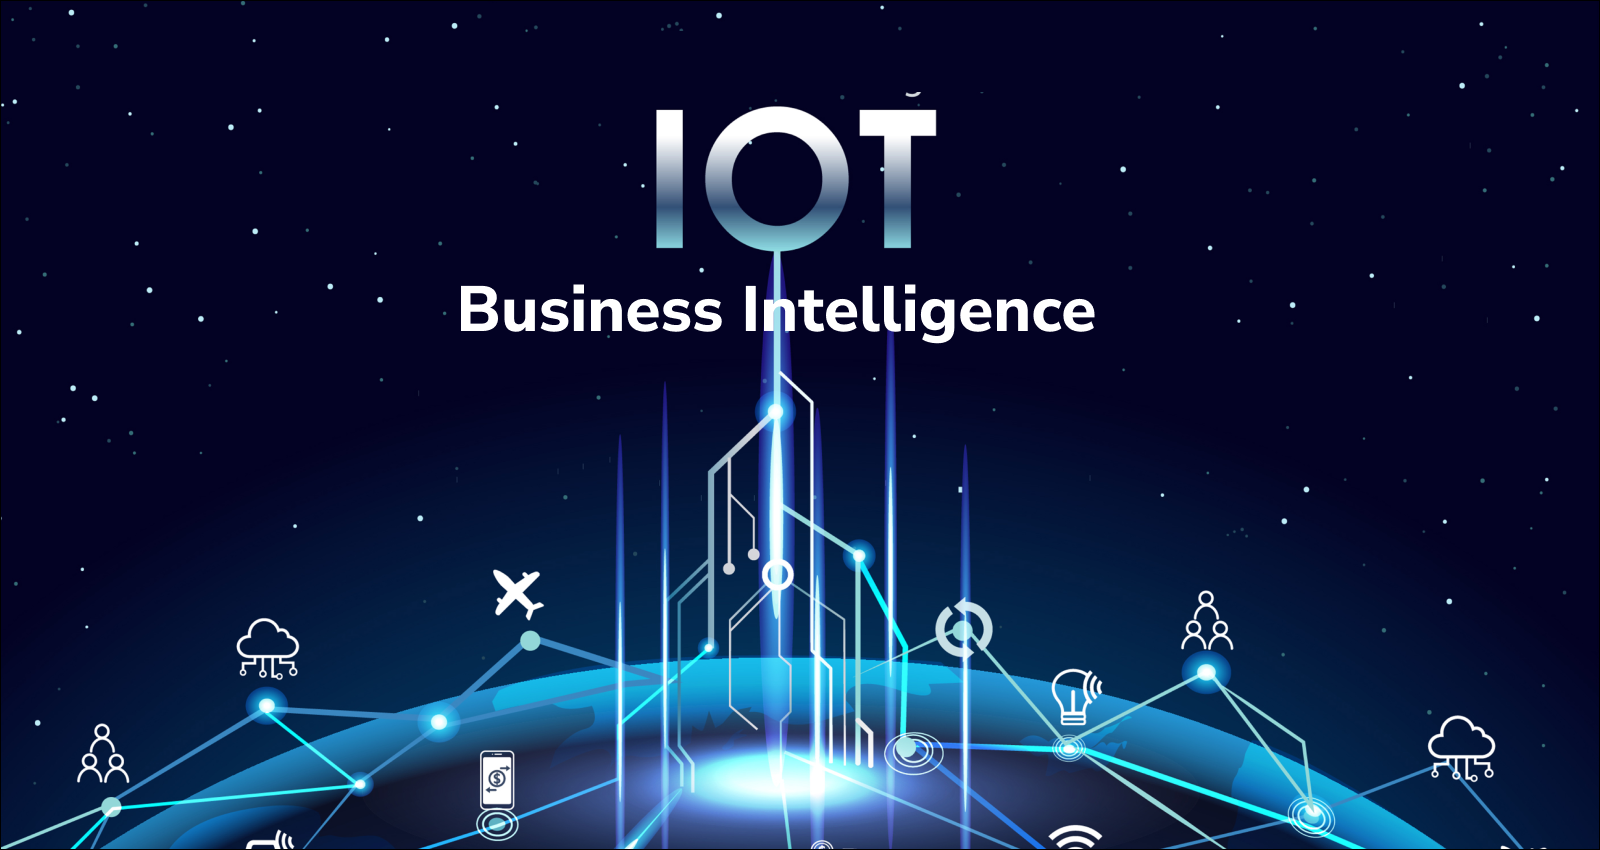 Methods to connect Business Intelligence to IoT, Internet of Things, Business Intelligence, Big Data, Data Analytics